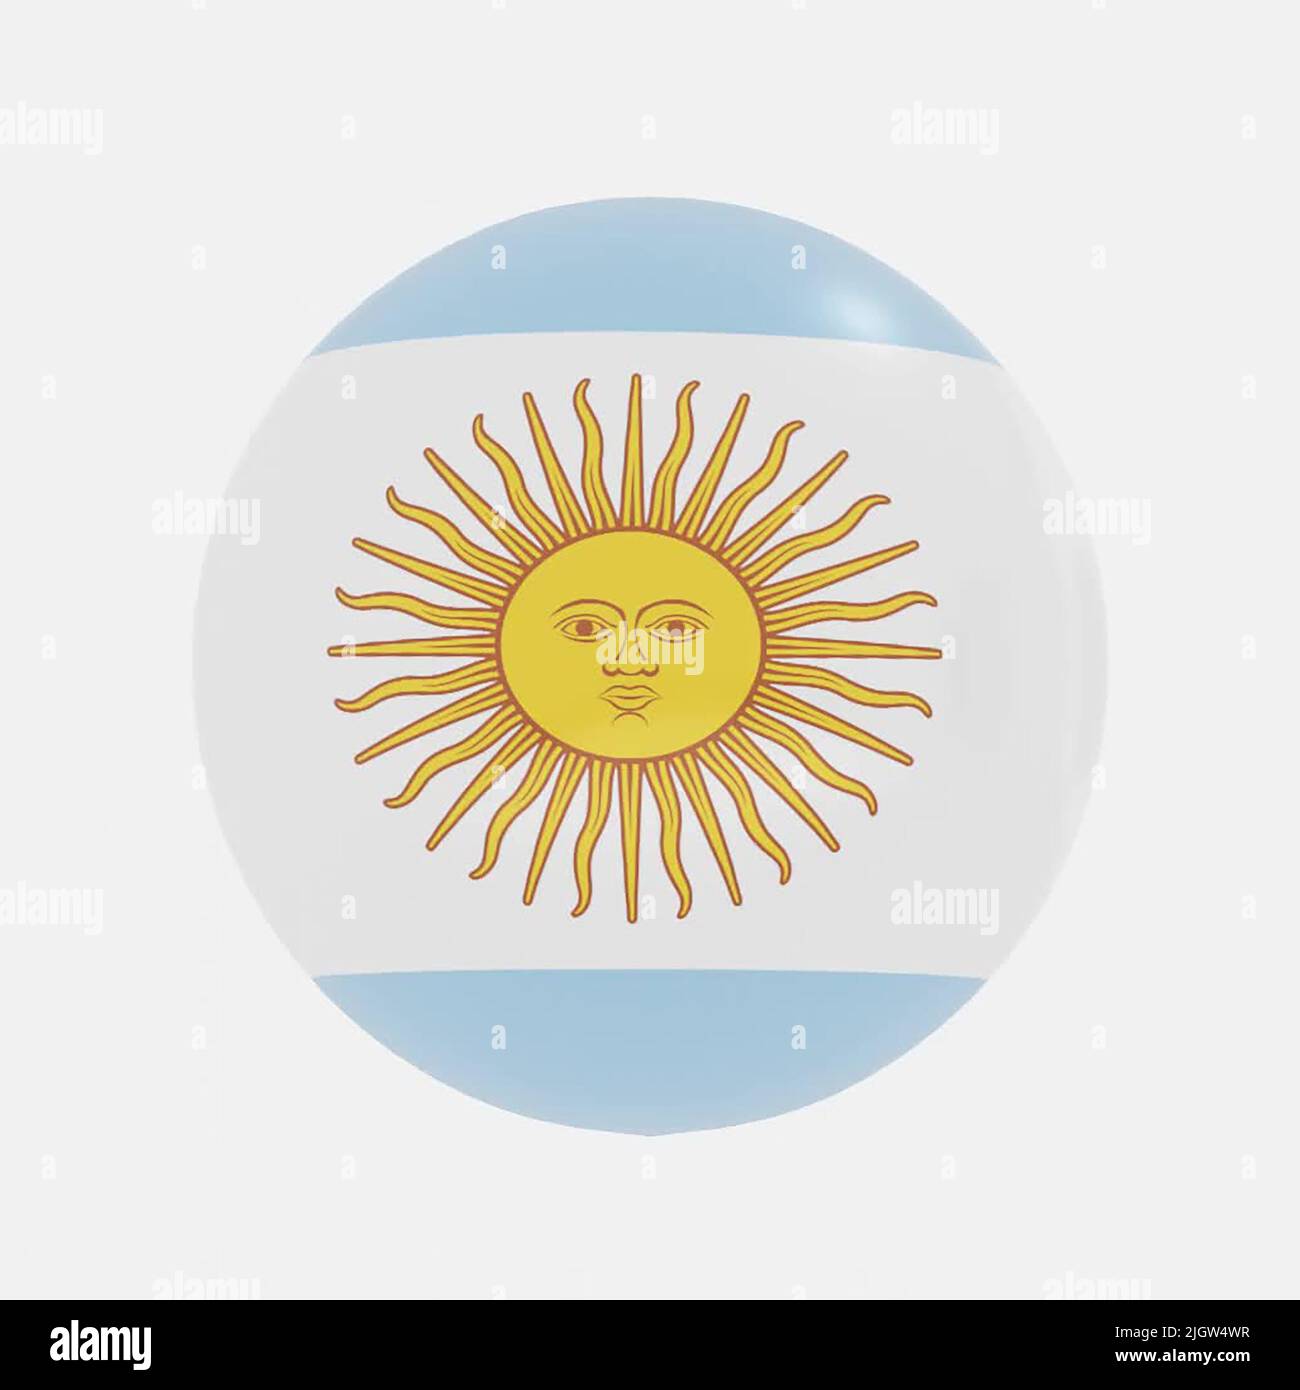 3d render of globe in Argentine countries flag for icon or symbol. Stock Photo